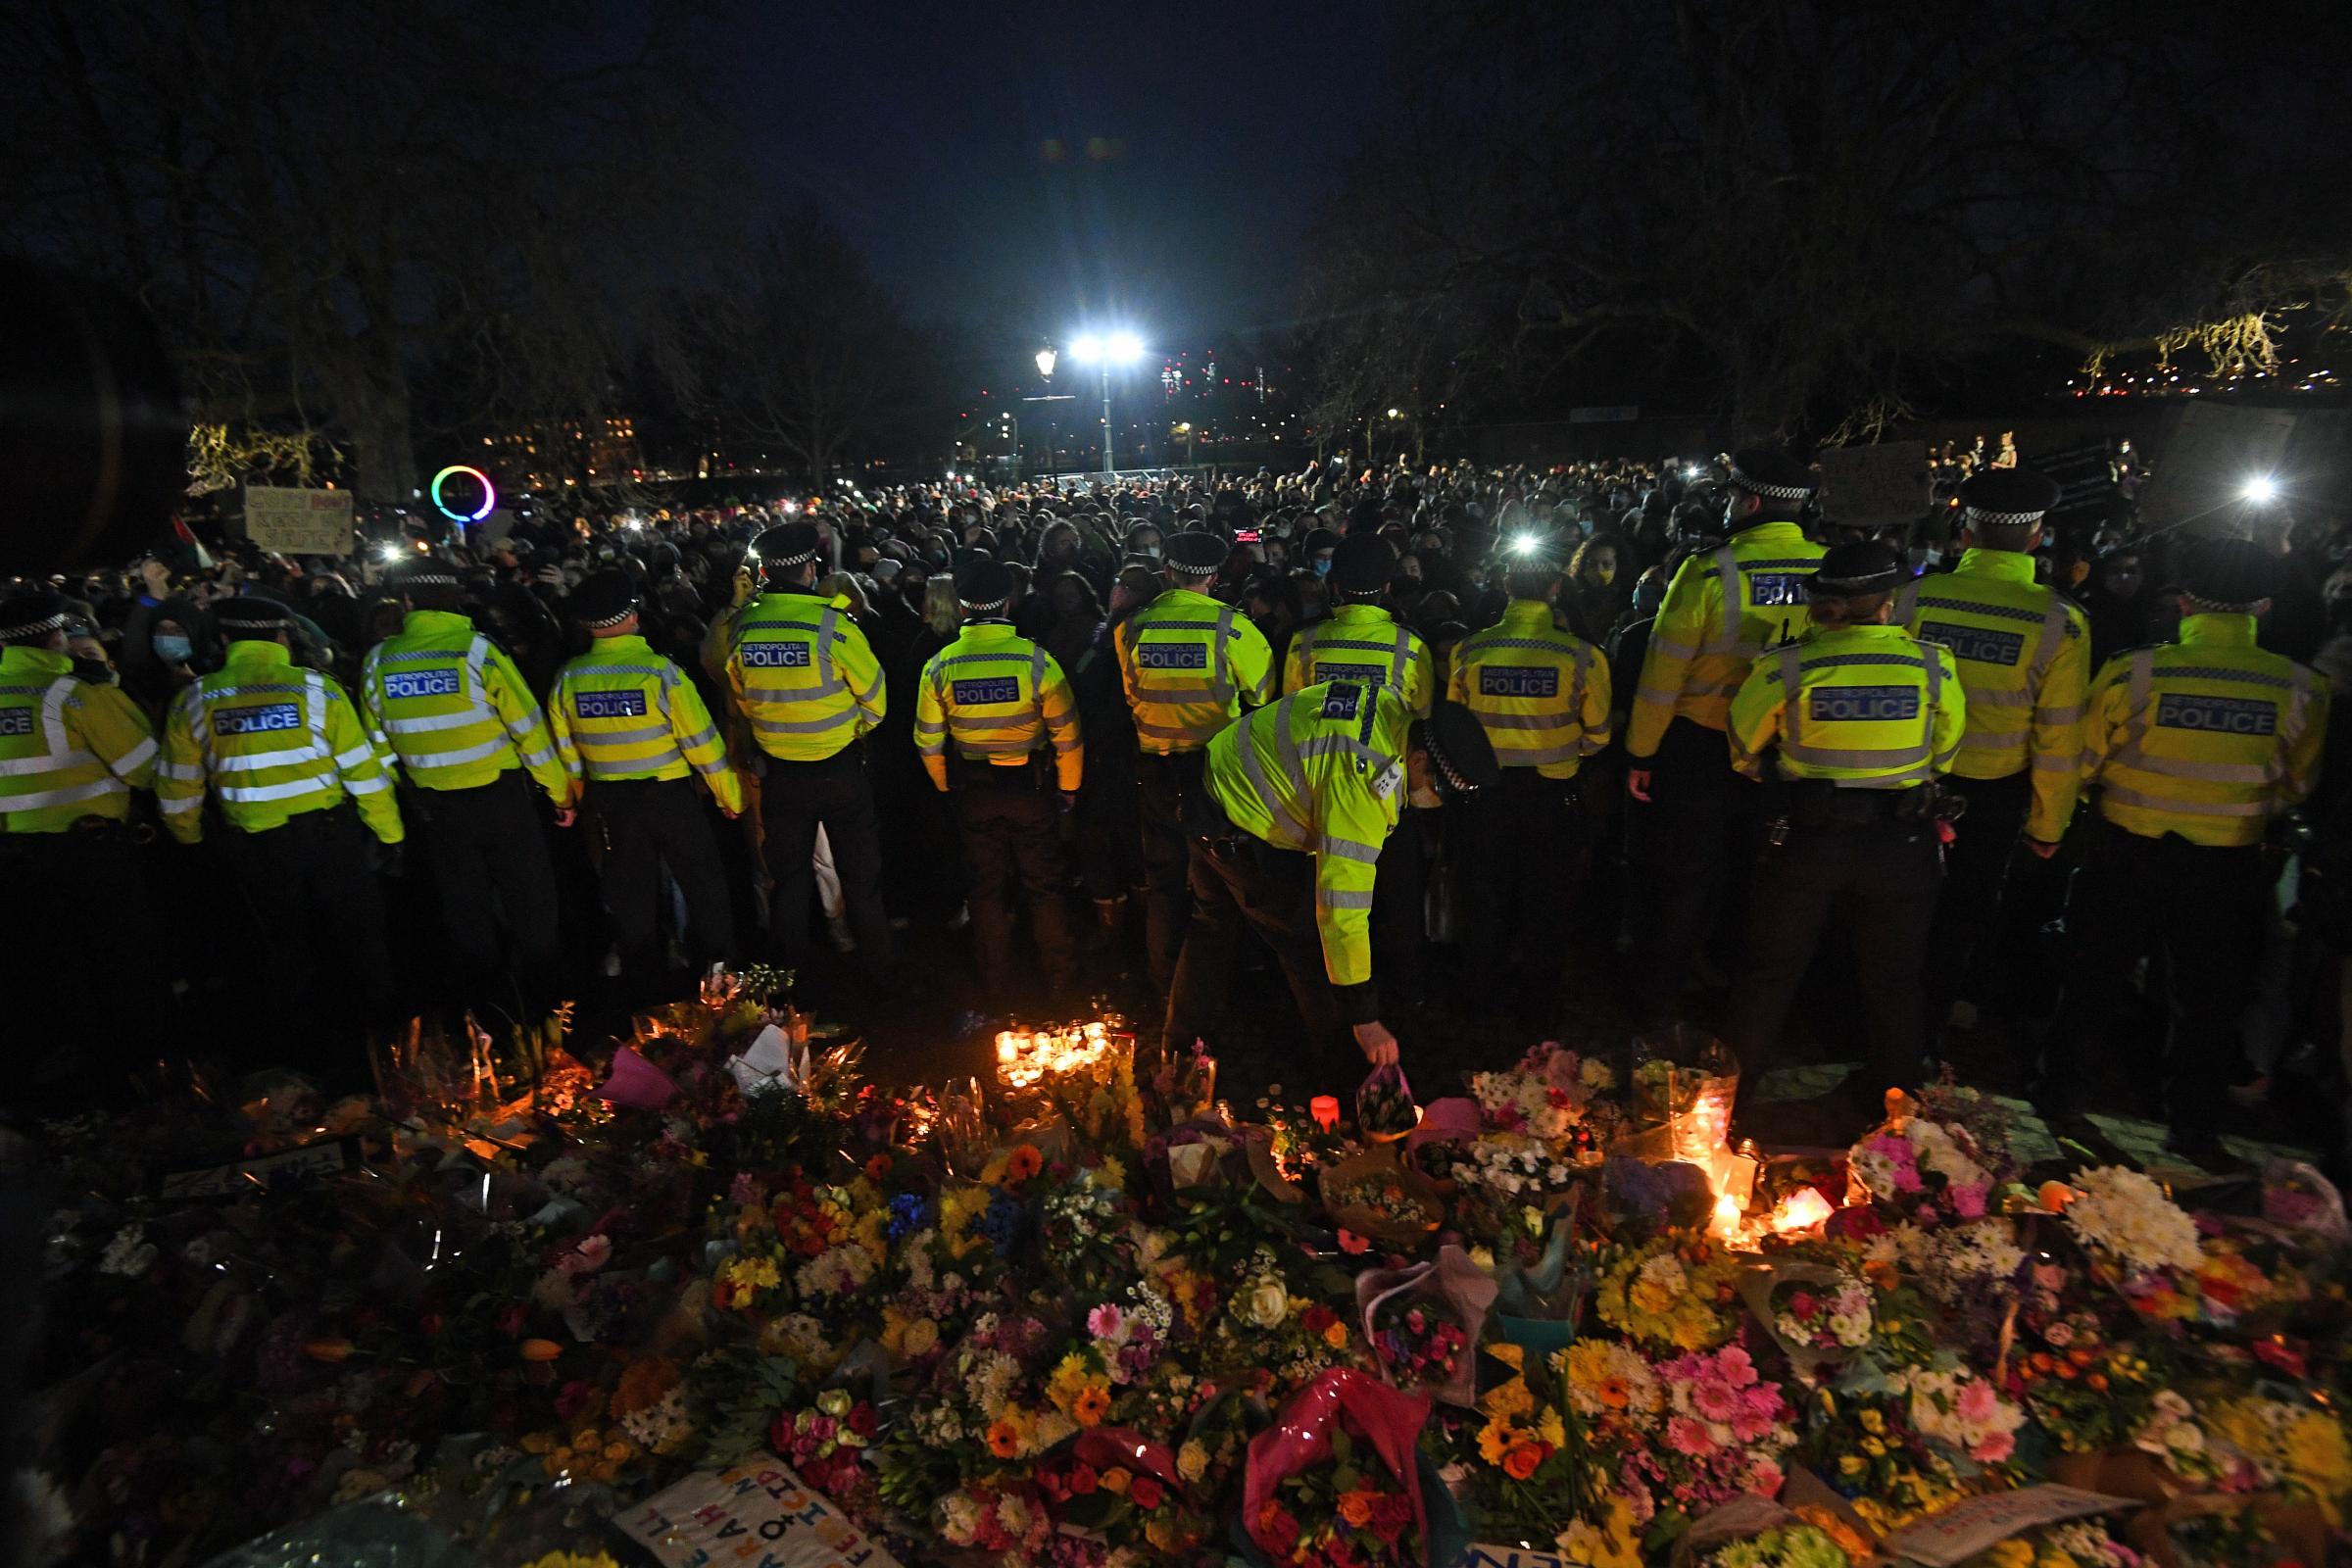 The Met was criticised for the way it handled the vigil on March 13. Credit: PA